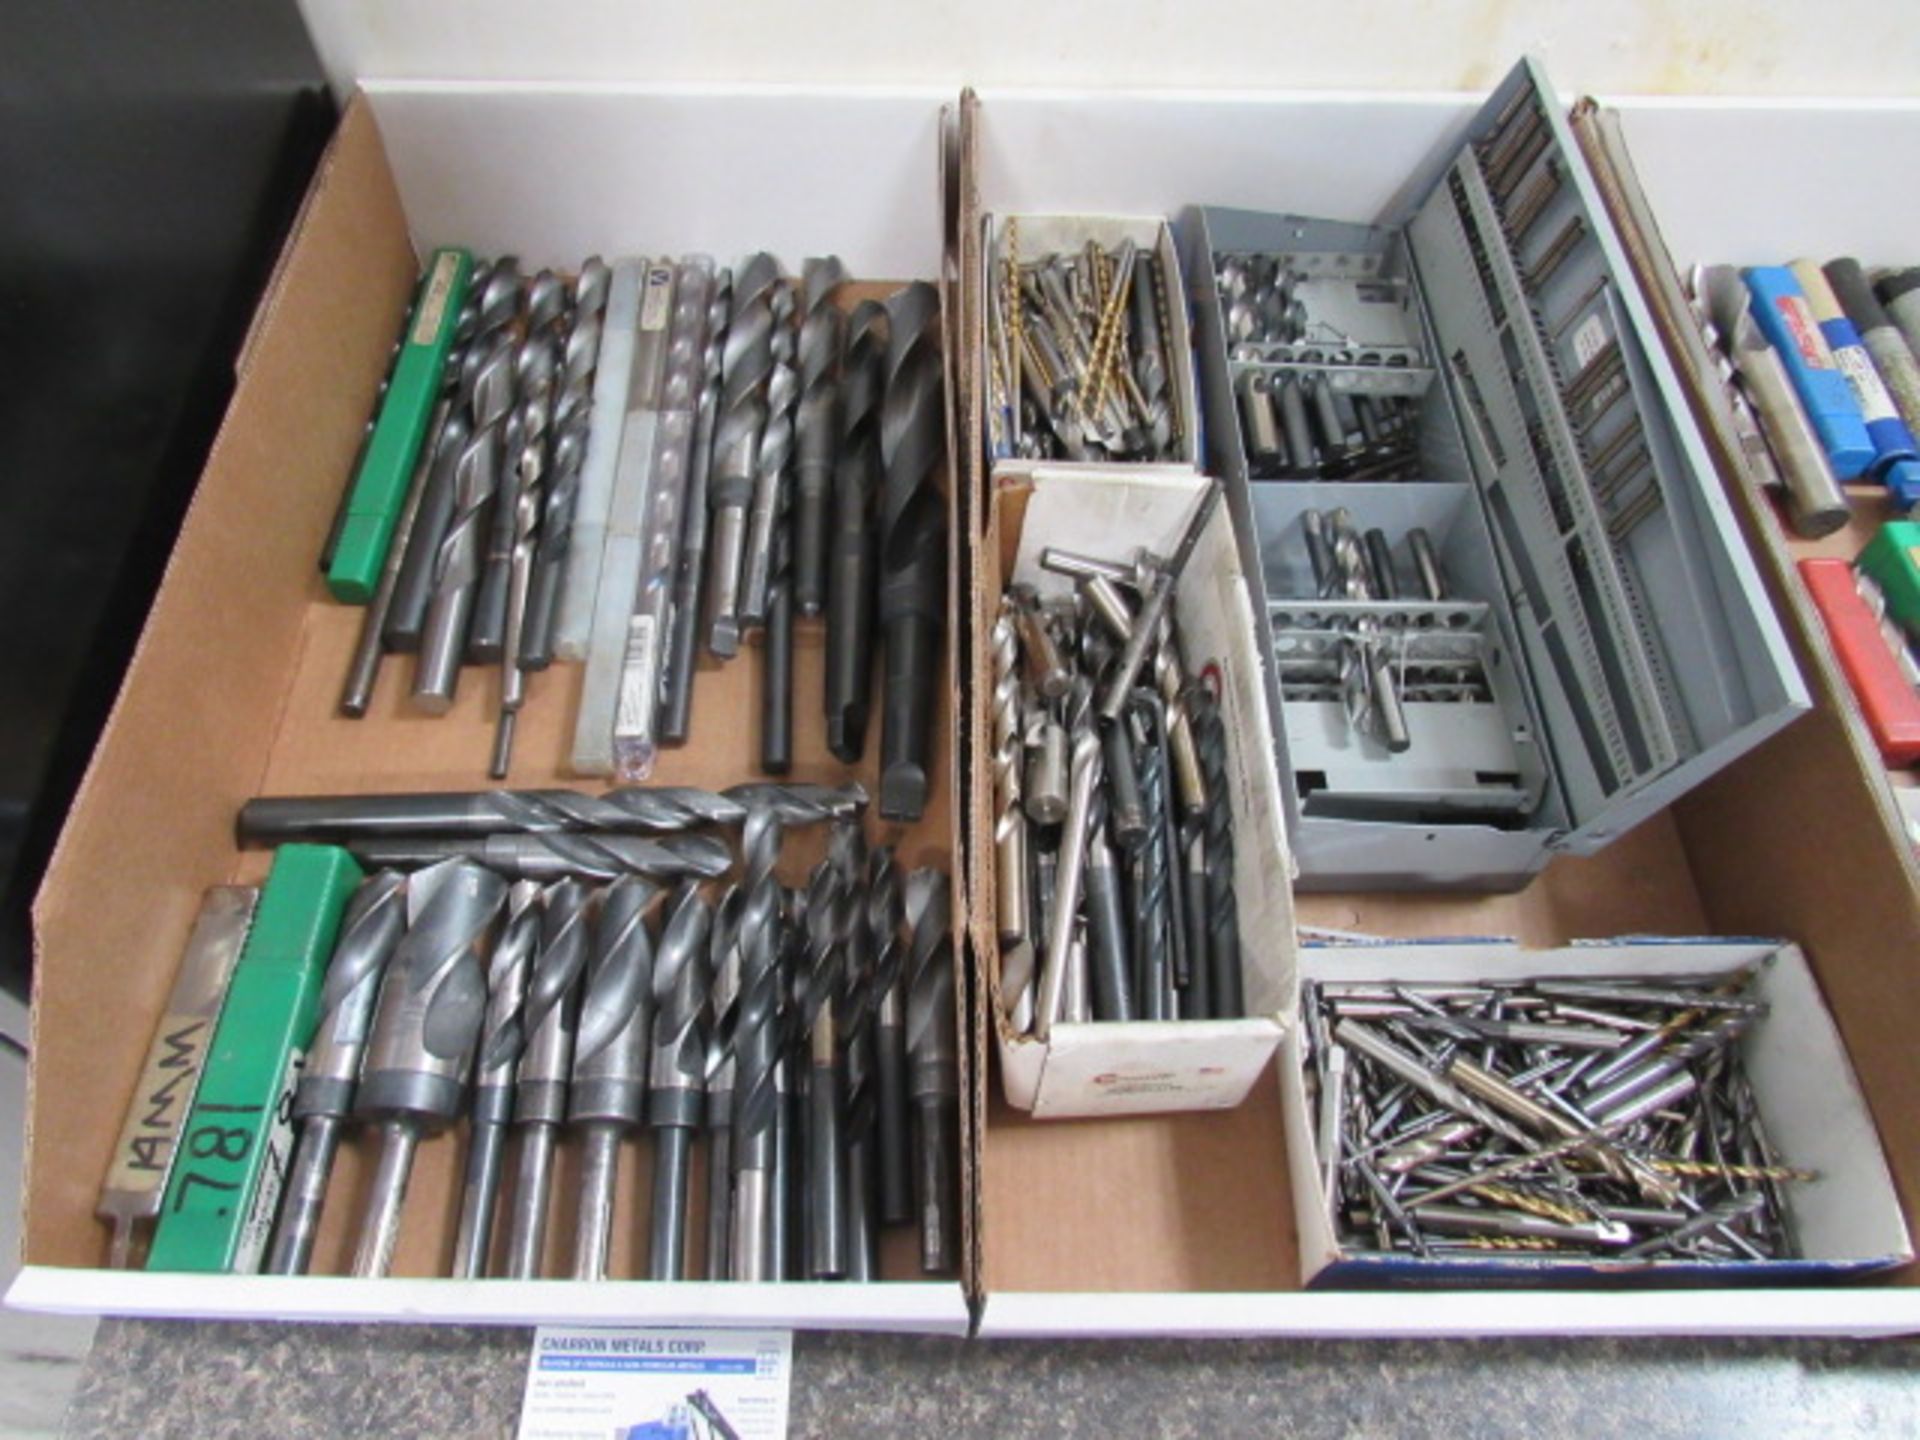 Drills (in 2 boxes)